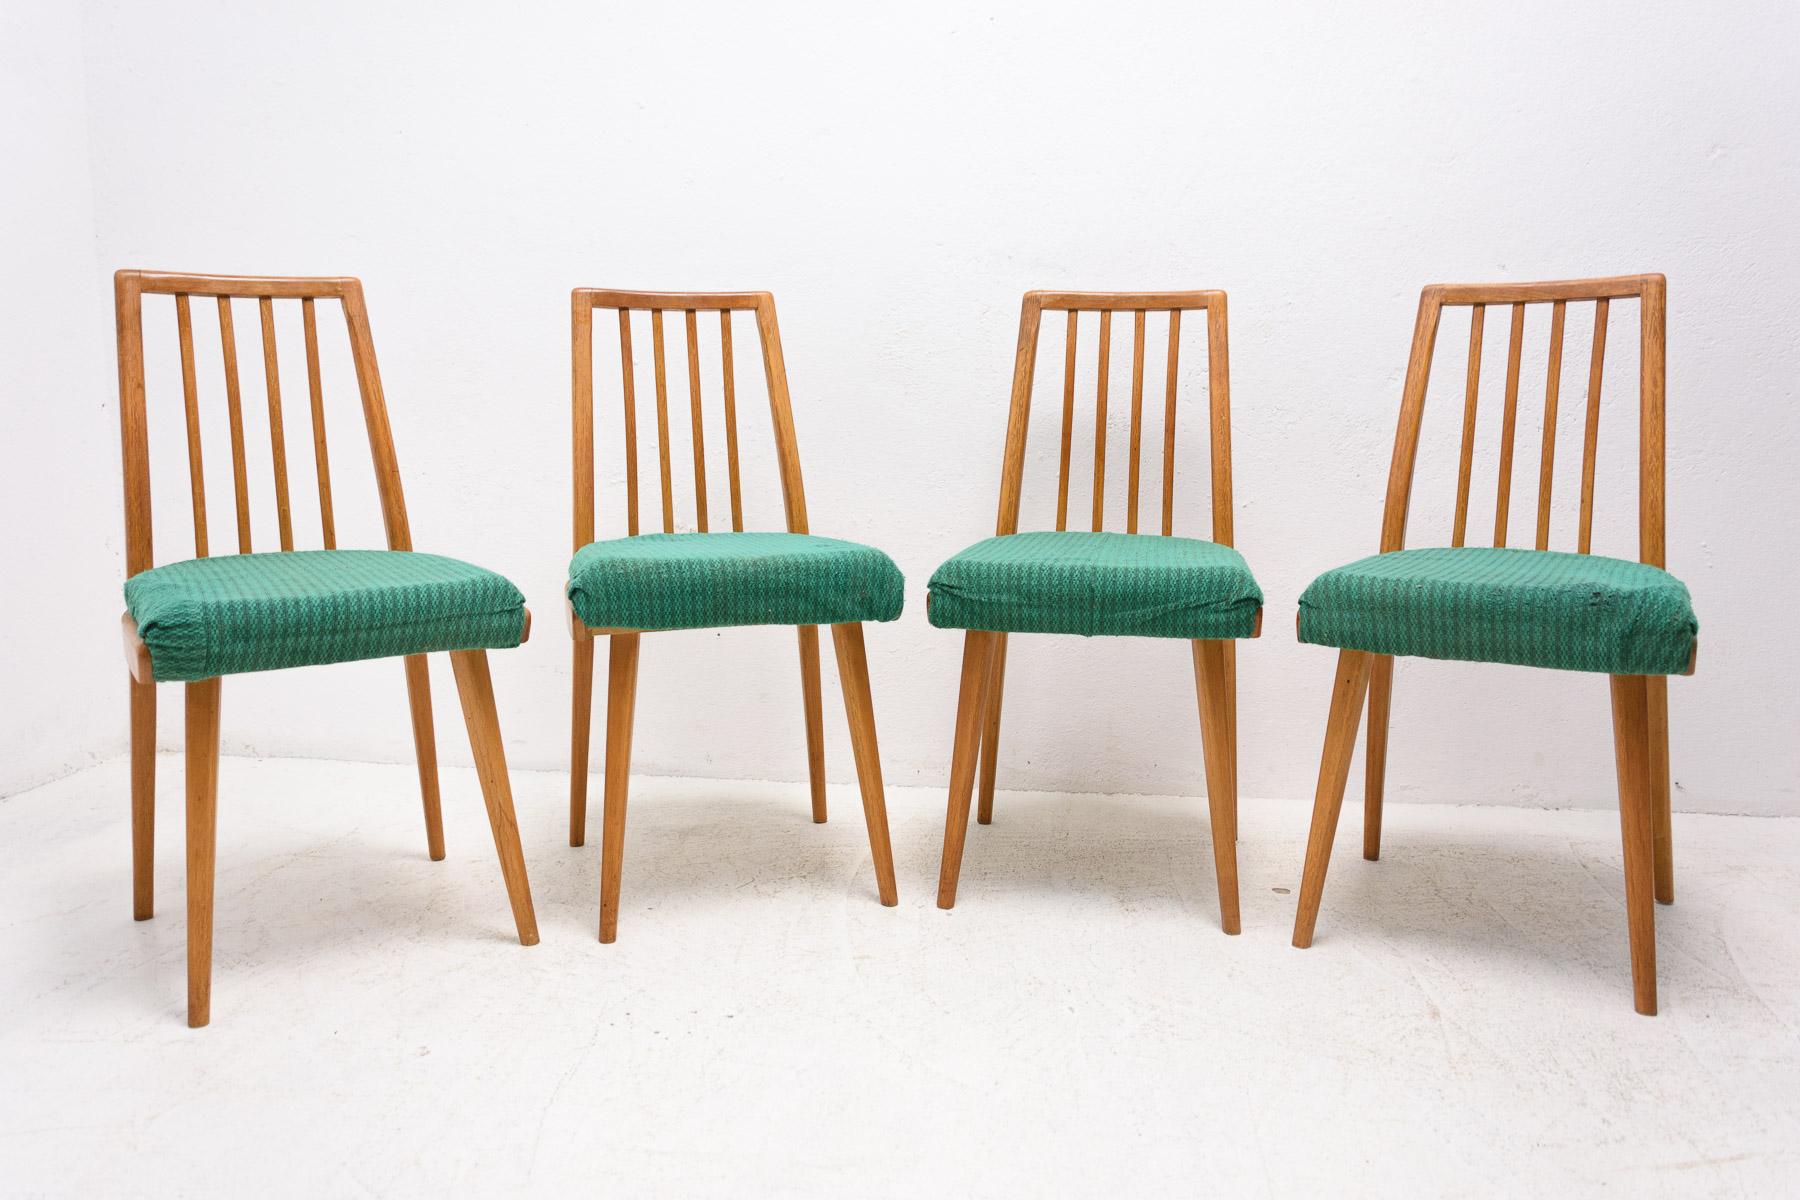 Set of four upholstered dining chairs, made in the former Czechoslovakia in the 1960s. The chairs are constructed of beech wood. Very interesting shaping. The upholstery and wood are in good Vintage condition, shows slight signs of age and using.